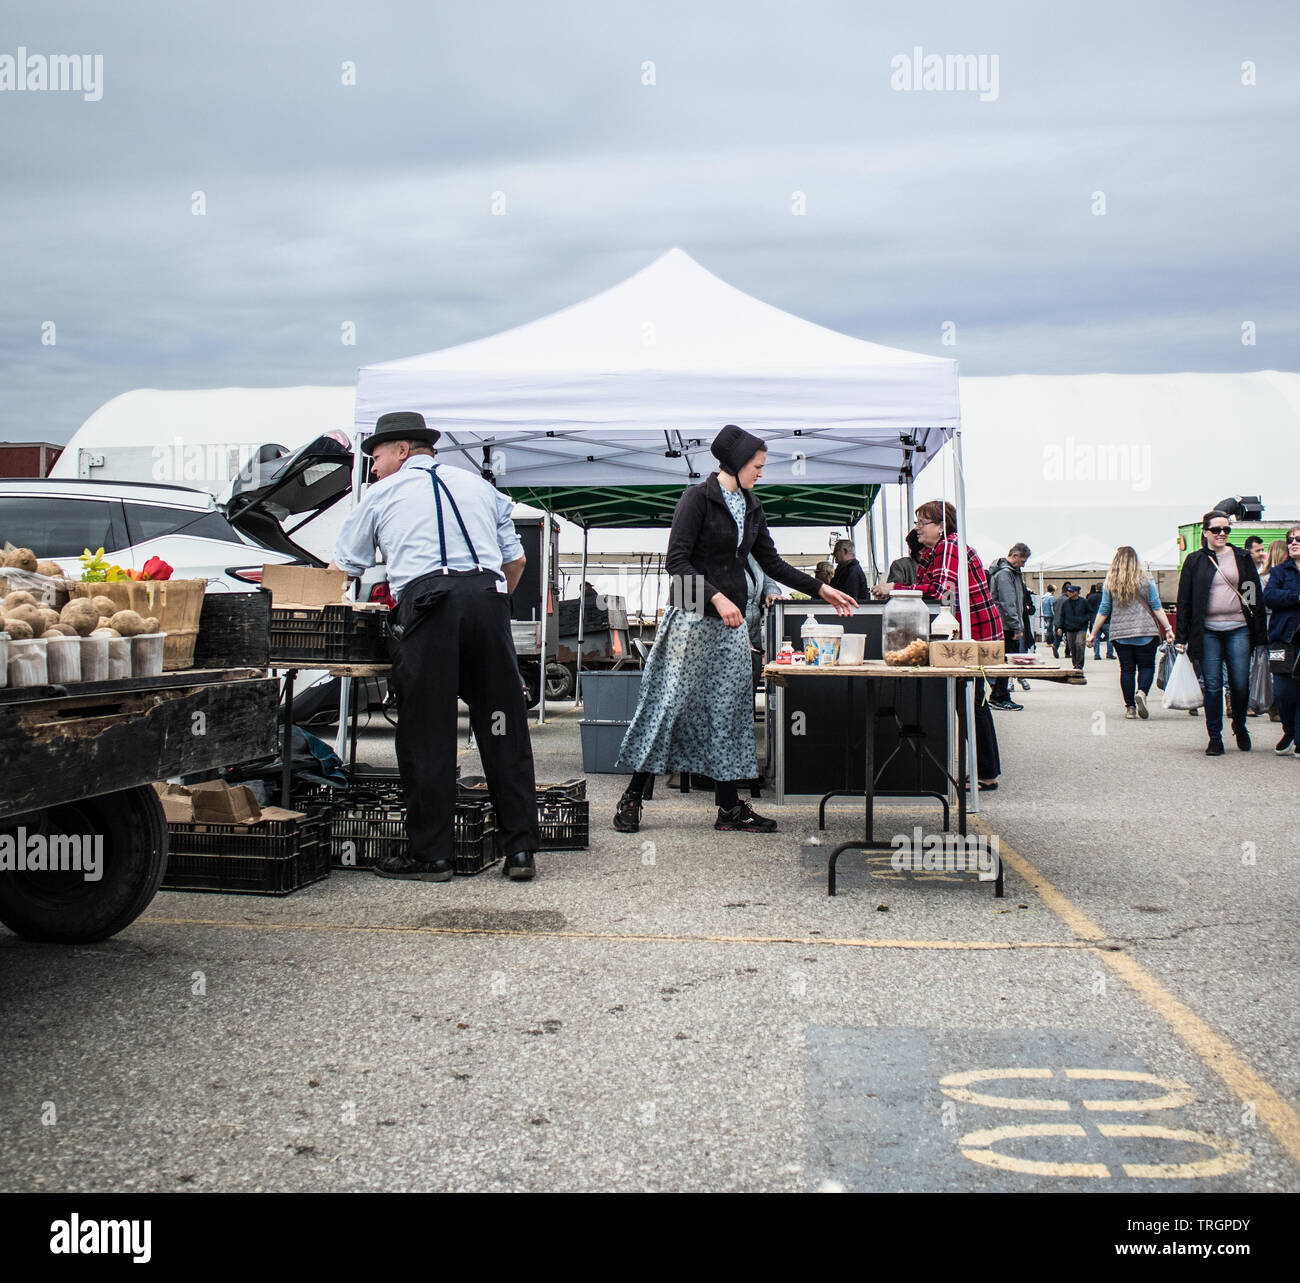 At the St. Jacobs Market, Waterloo region, Ontario. A male and female from the Mennonite community selling their products. Stock Photo